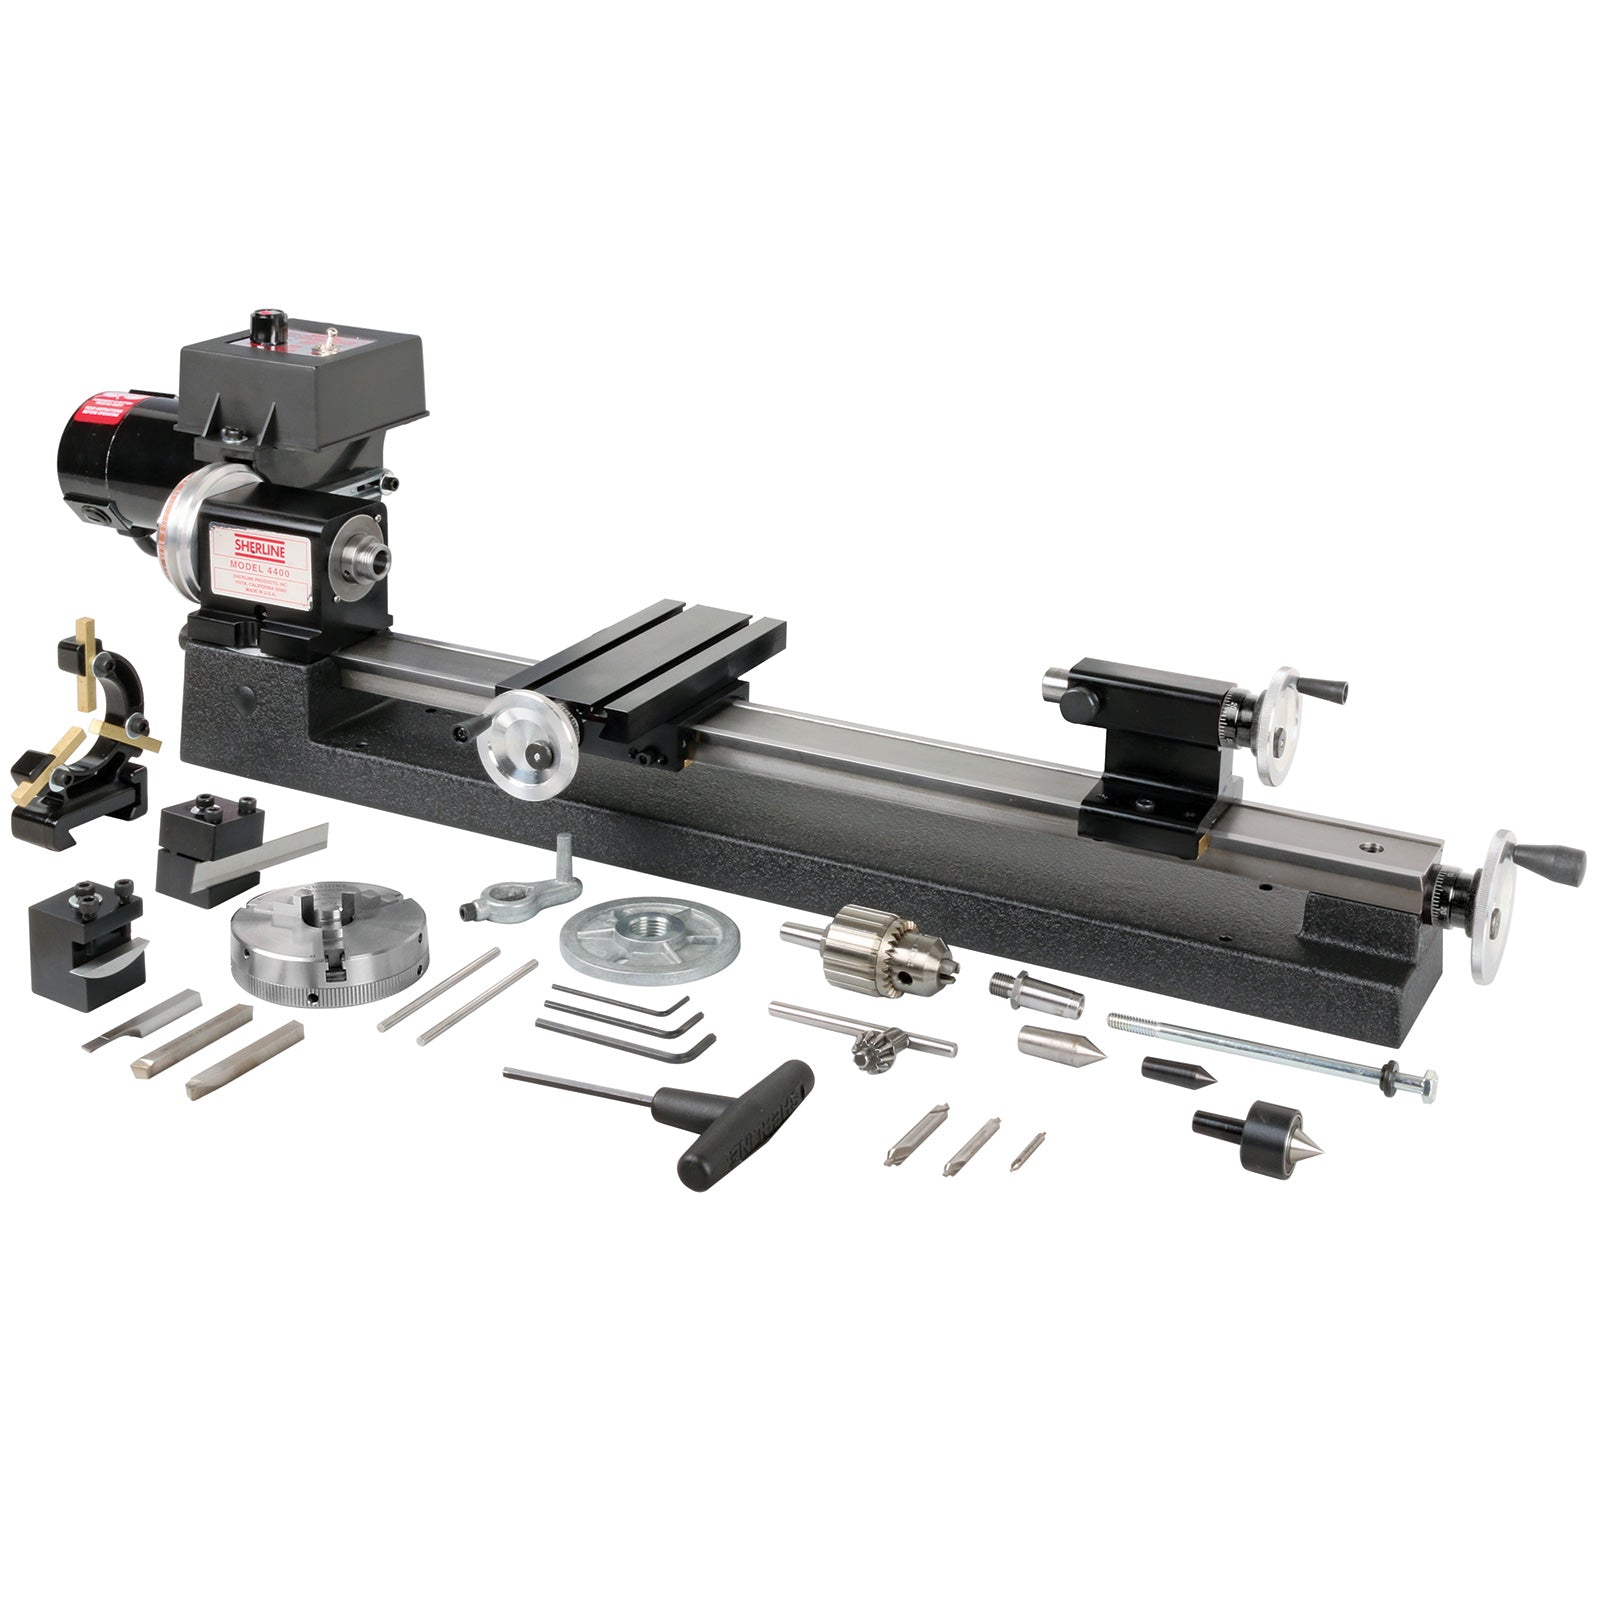 Sherline 4400 Series 3.5" x 17" Lathe Package - Micro - Mark Lathes